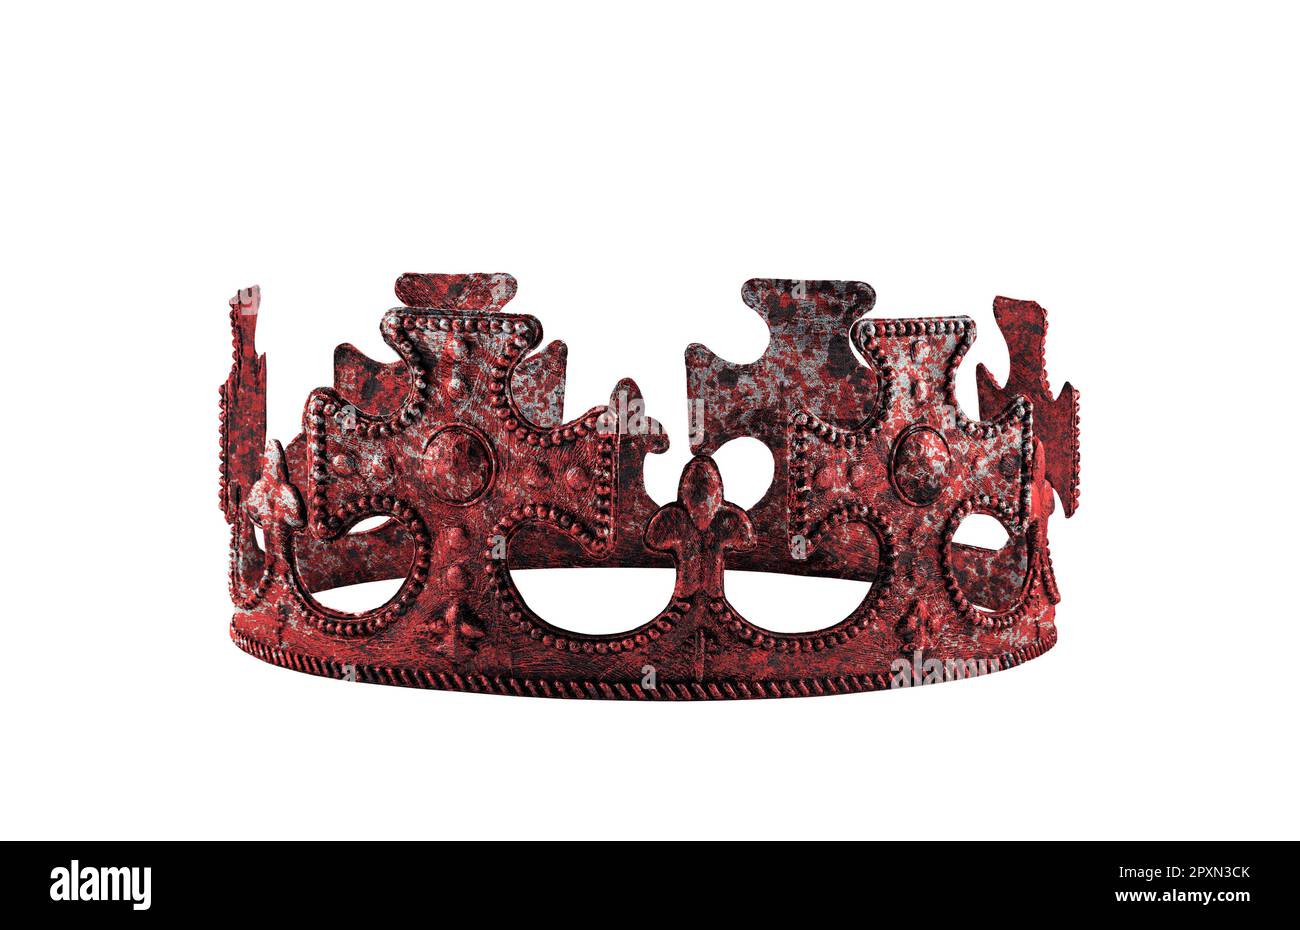 King or Queen's old crown in red blood isolated on white background with clipping path Stock Photo